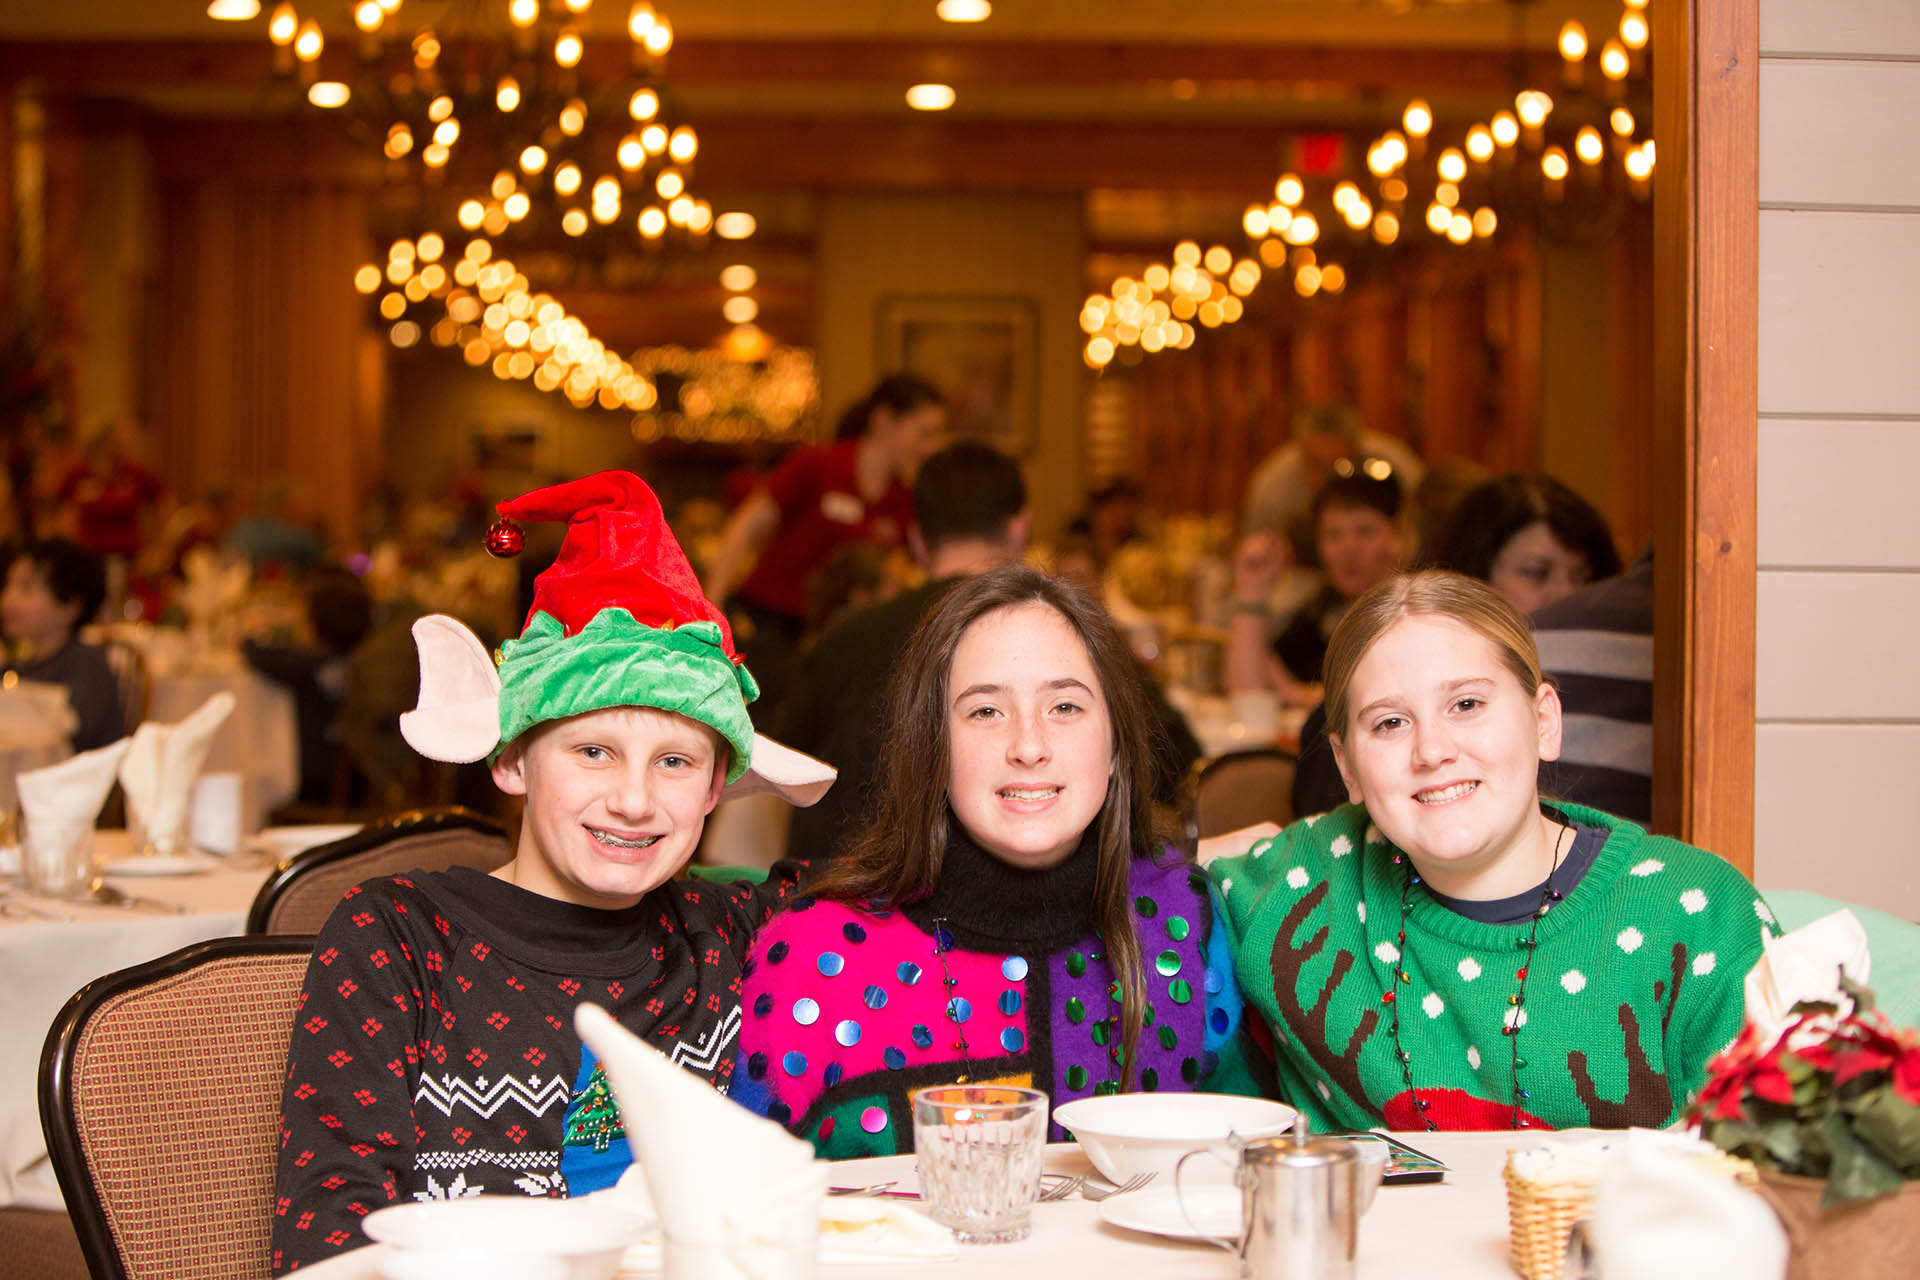 Three young people with Christmas sweaters.